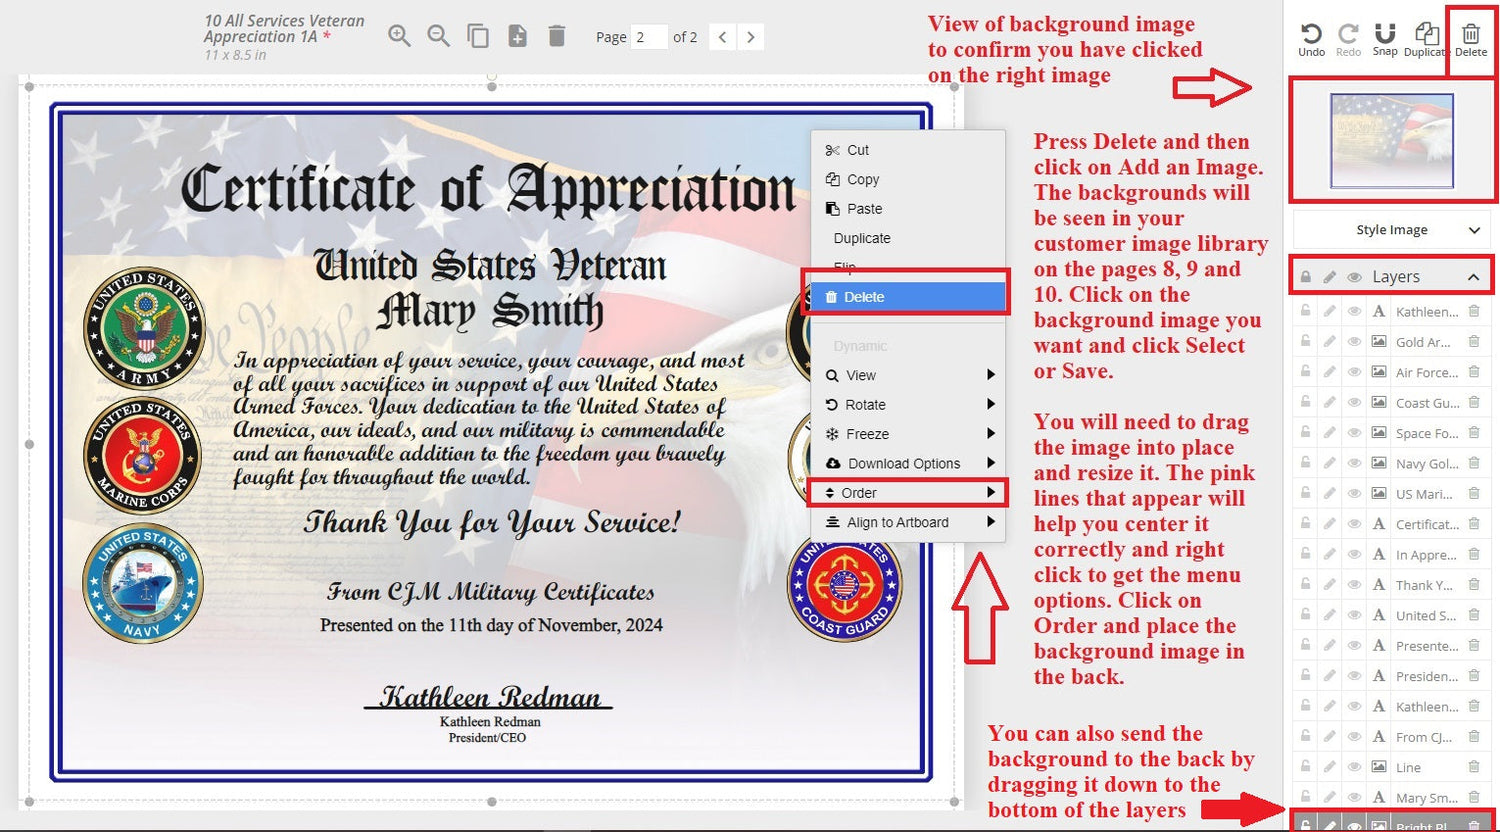 How to Delete the Background and add a new background to your military certificate